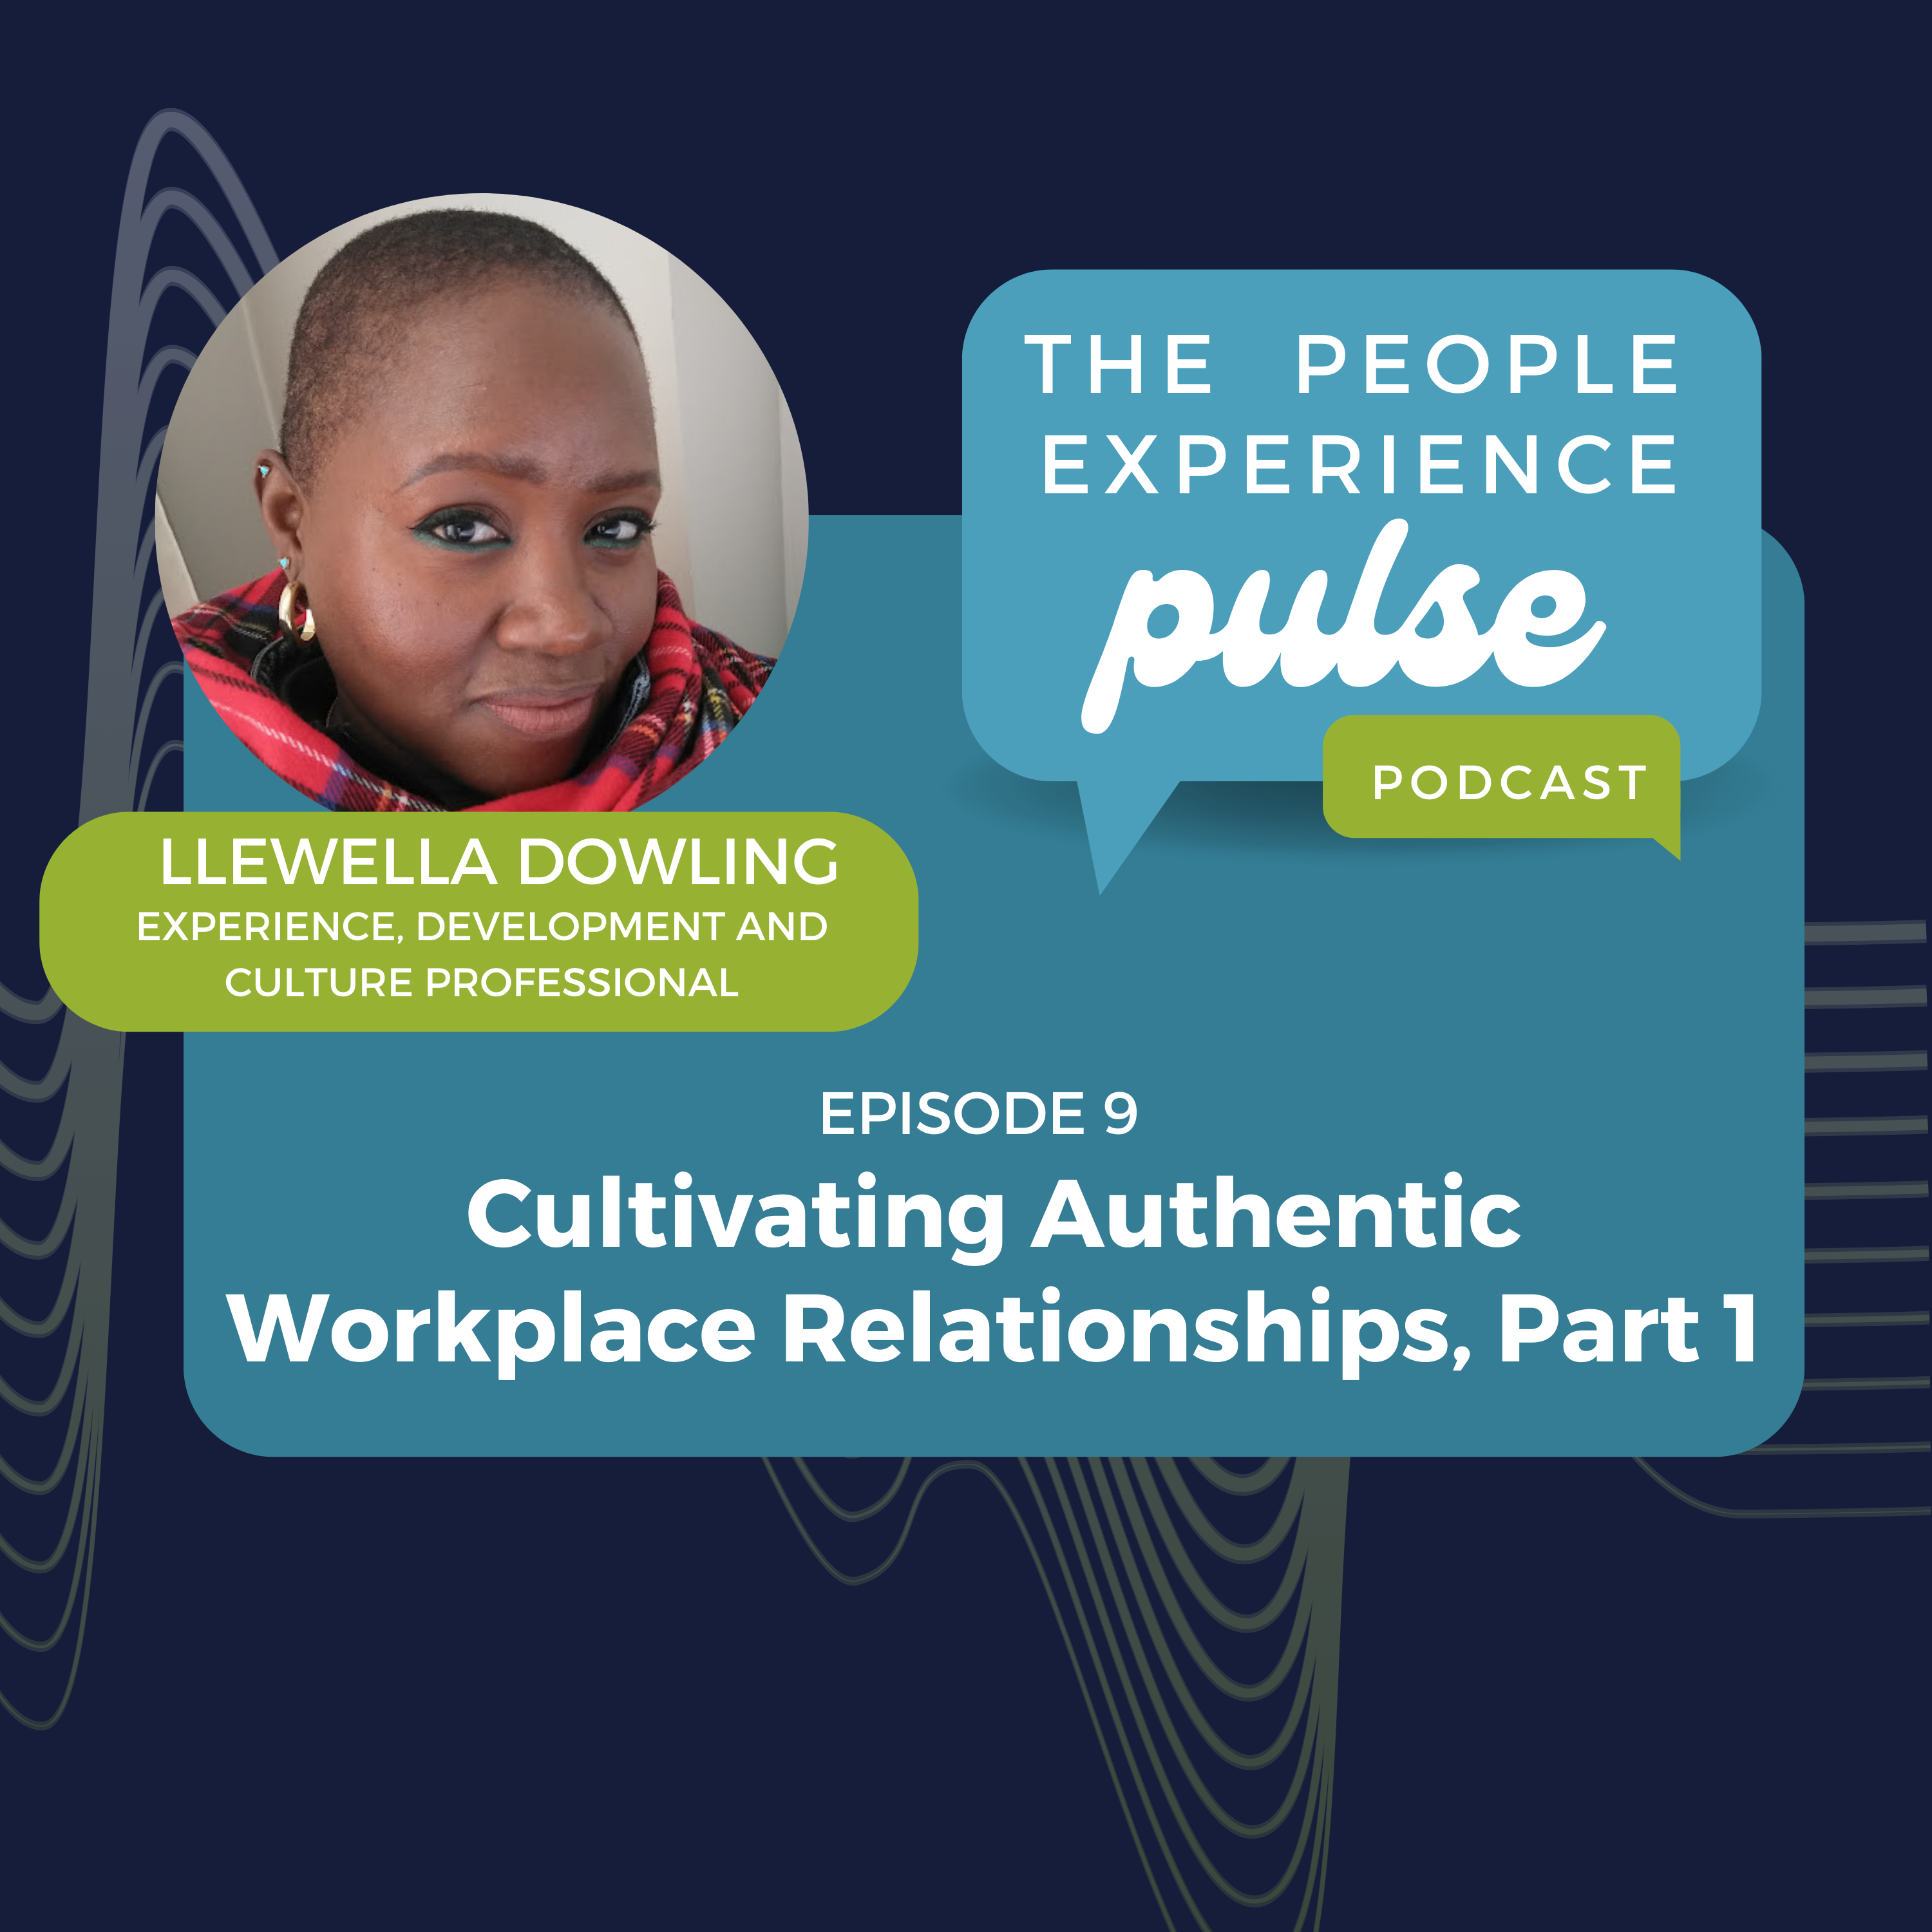 Episode 9: Cultivating Authentic Workplace Relationships with Llewella Dowling, Part 1